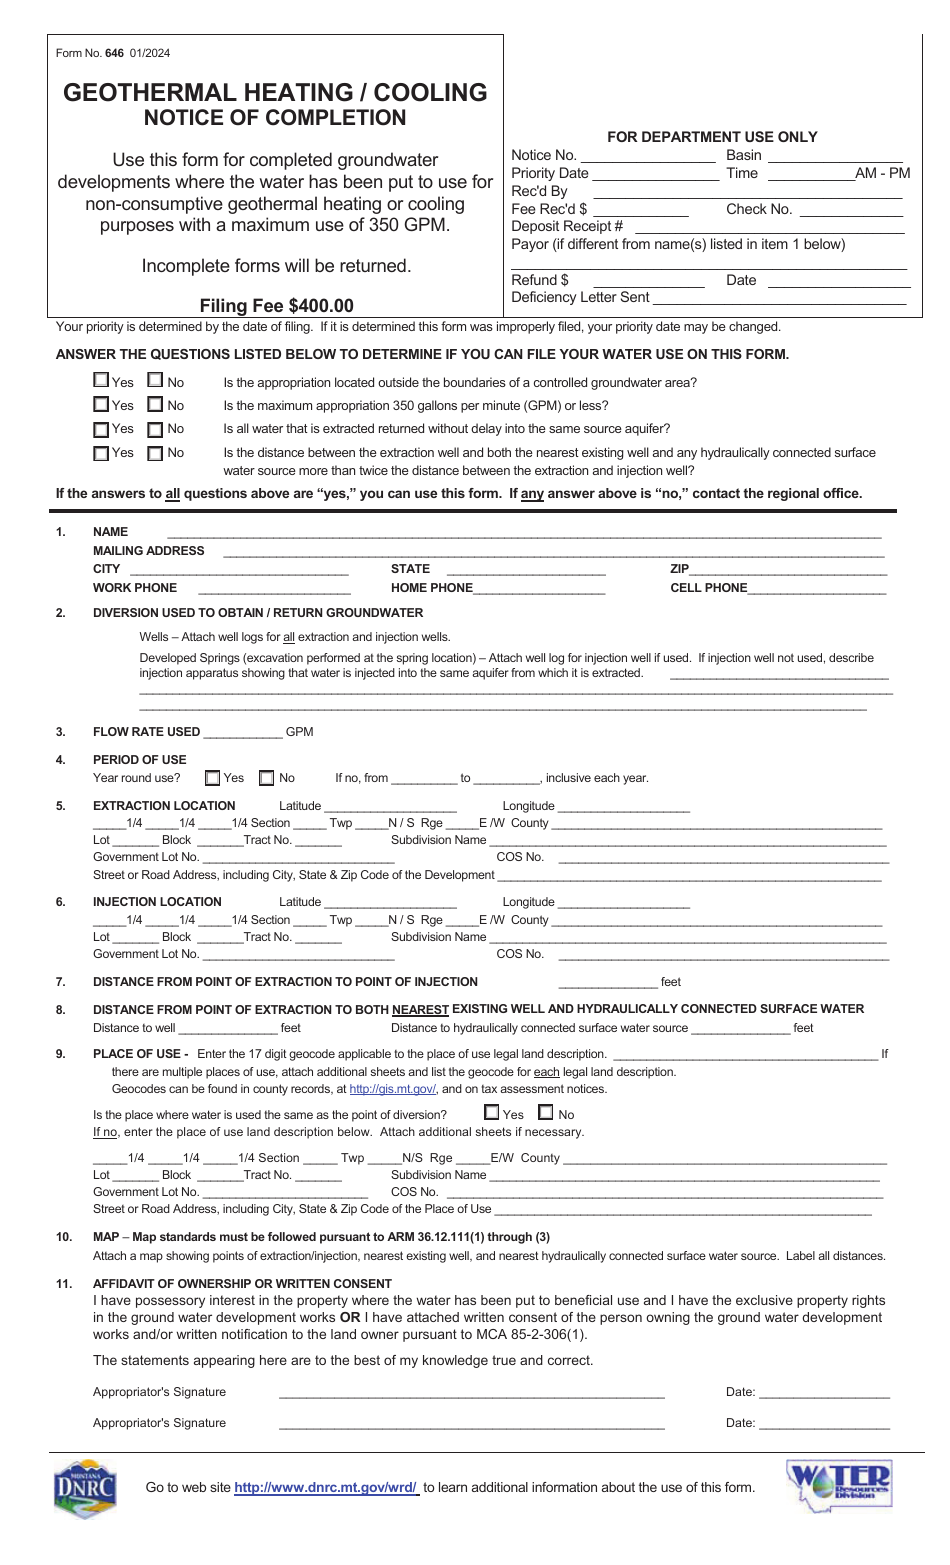 Form 646 Geothermal Heating / Cooling Notice of Completion - Montana, Page 1